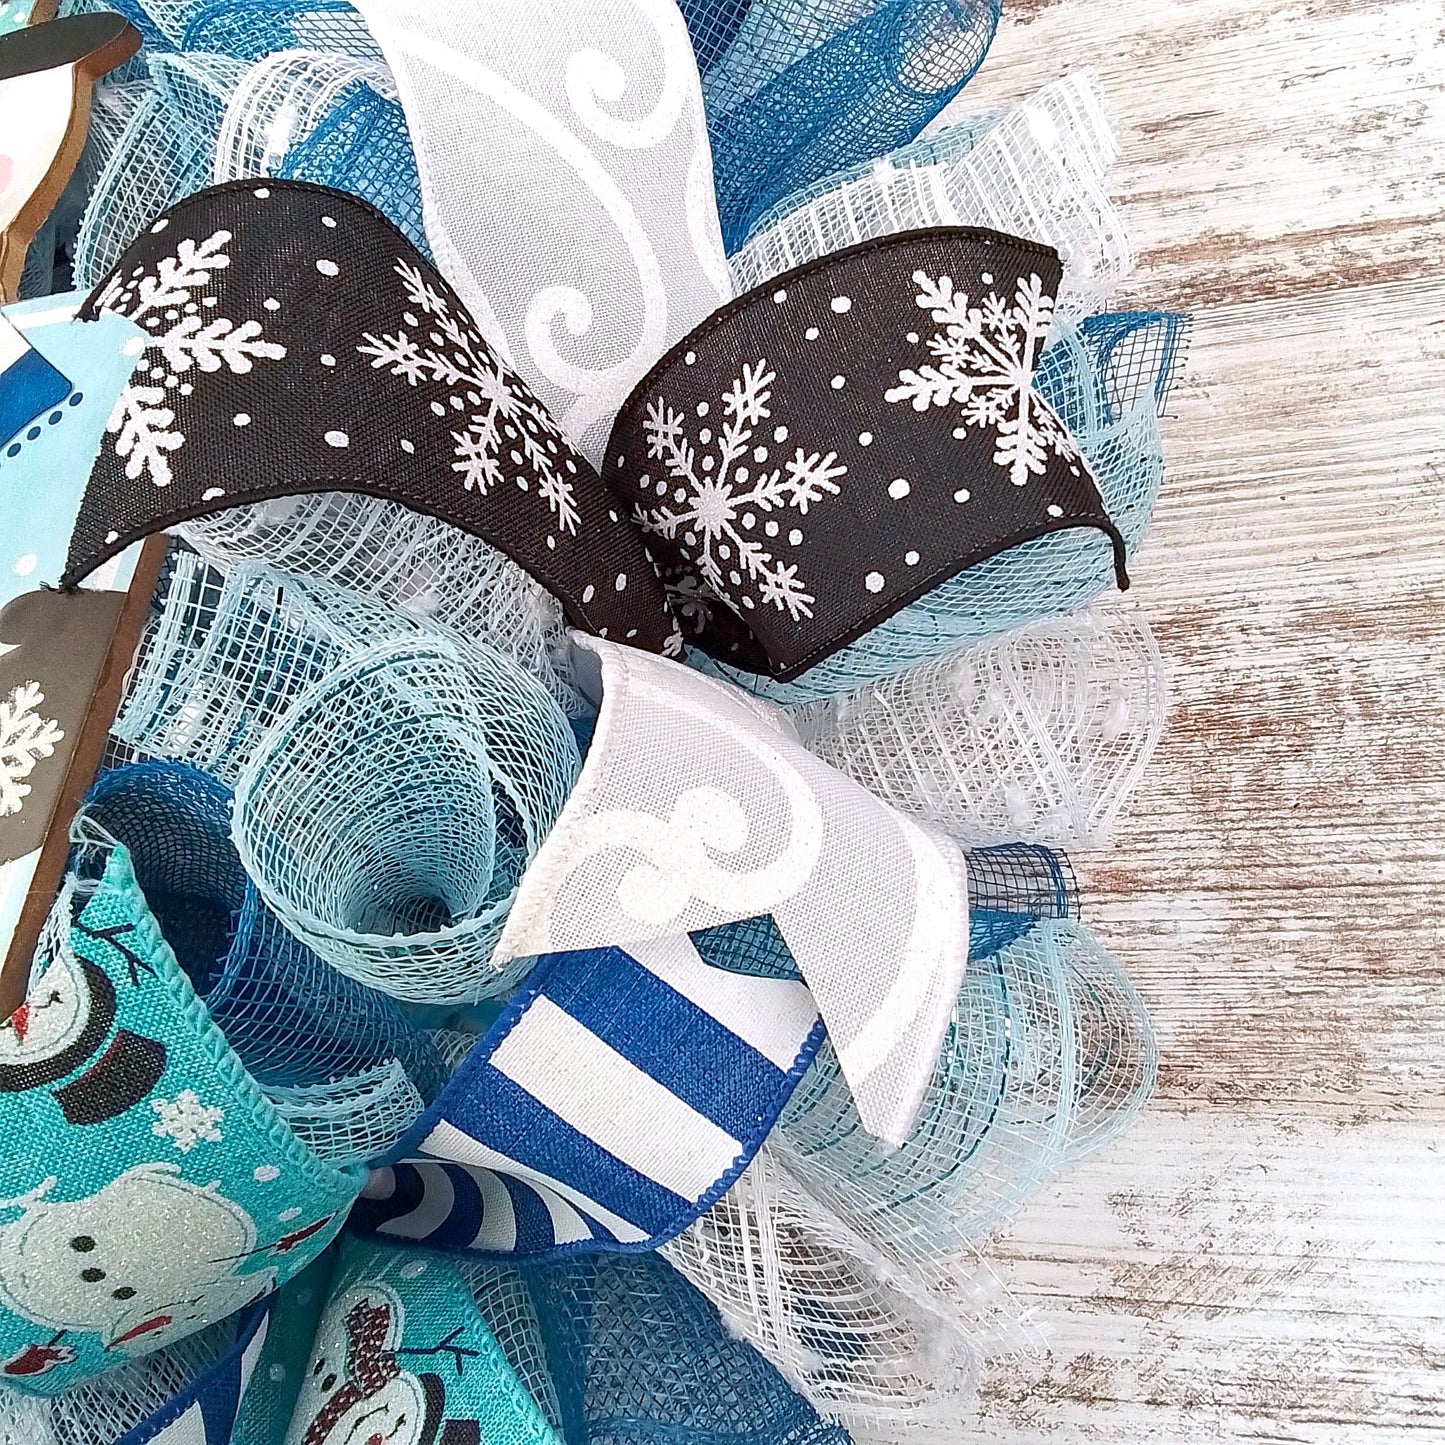 Freezin Winter Snowman Wreaths - Blue Cold Front Door Wreath - Outdoor Christmas Decor - White Turquoise Blue Silver